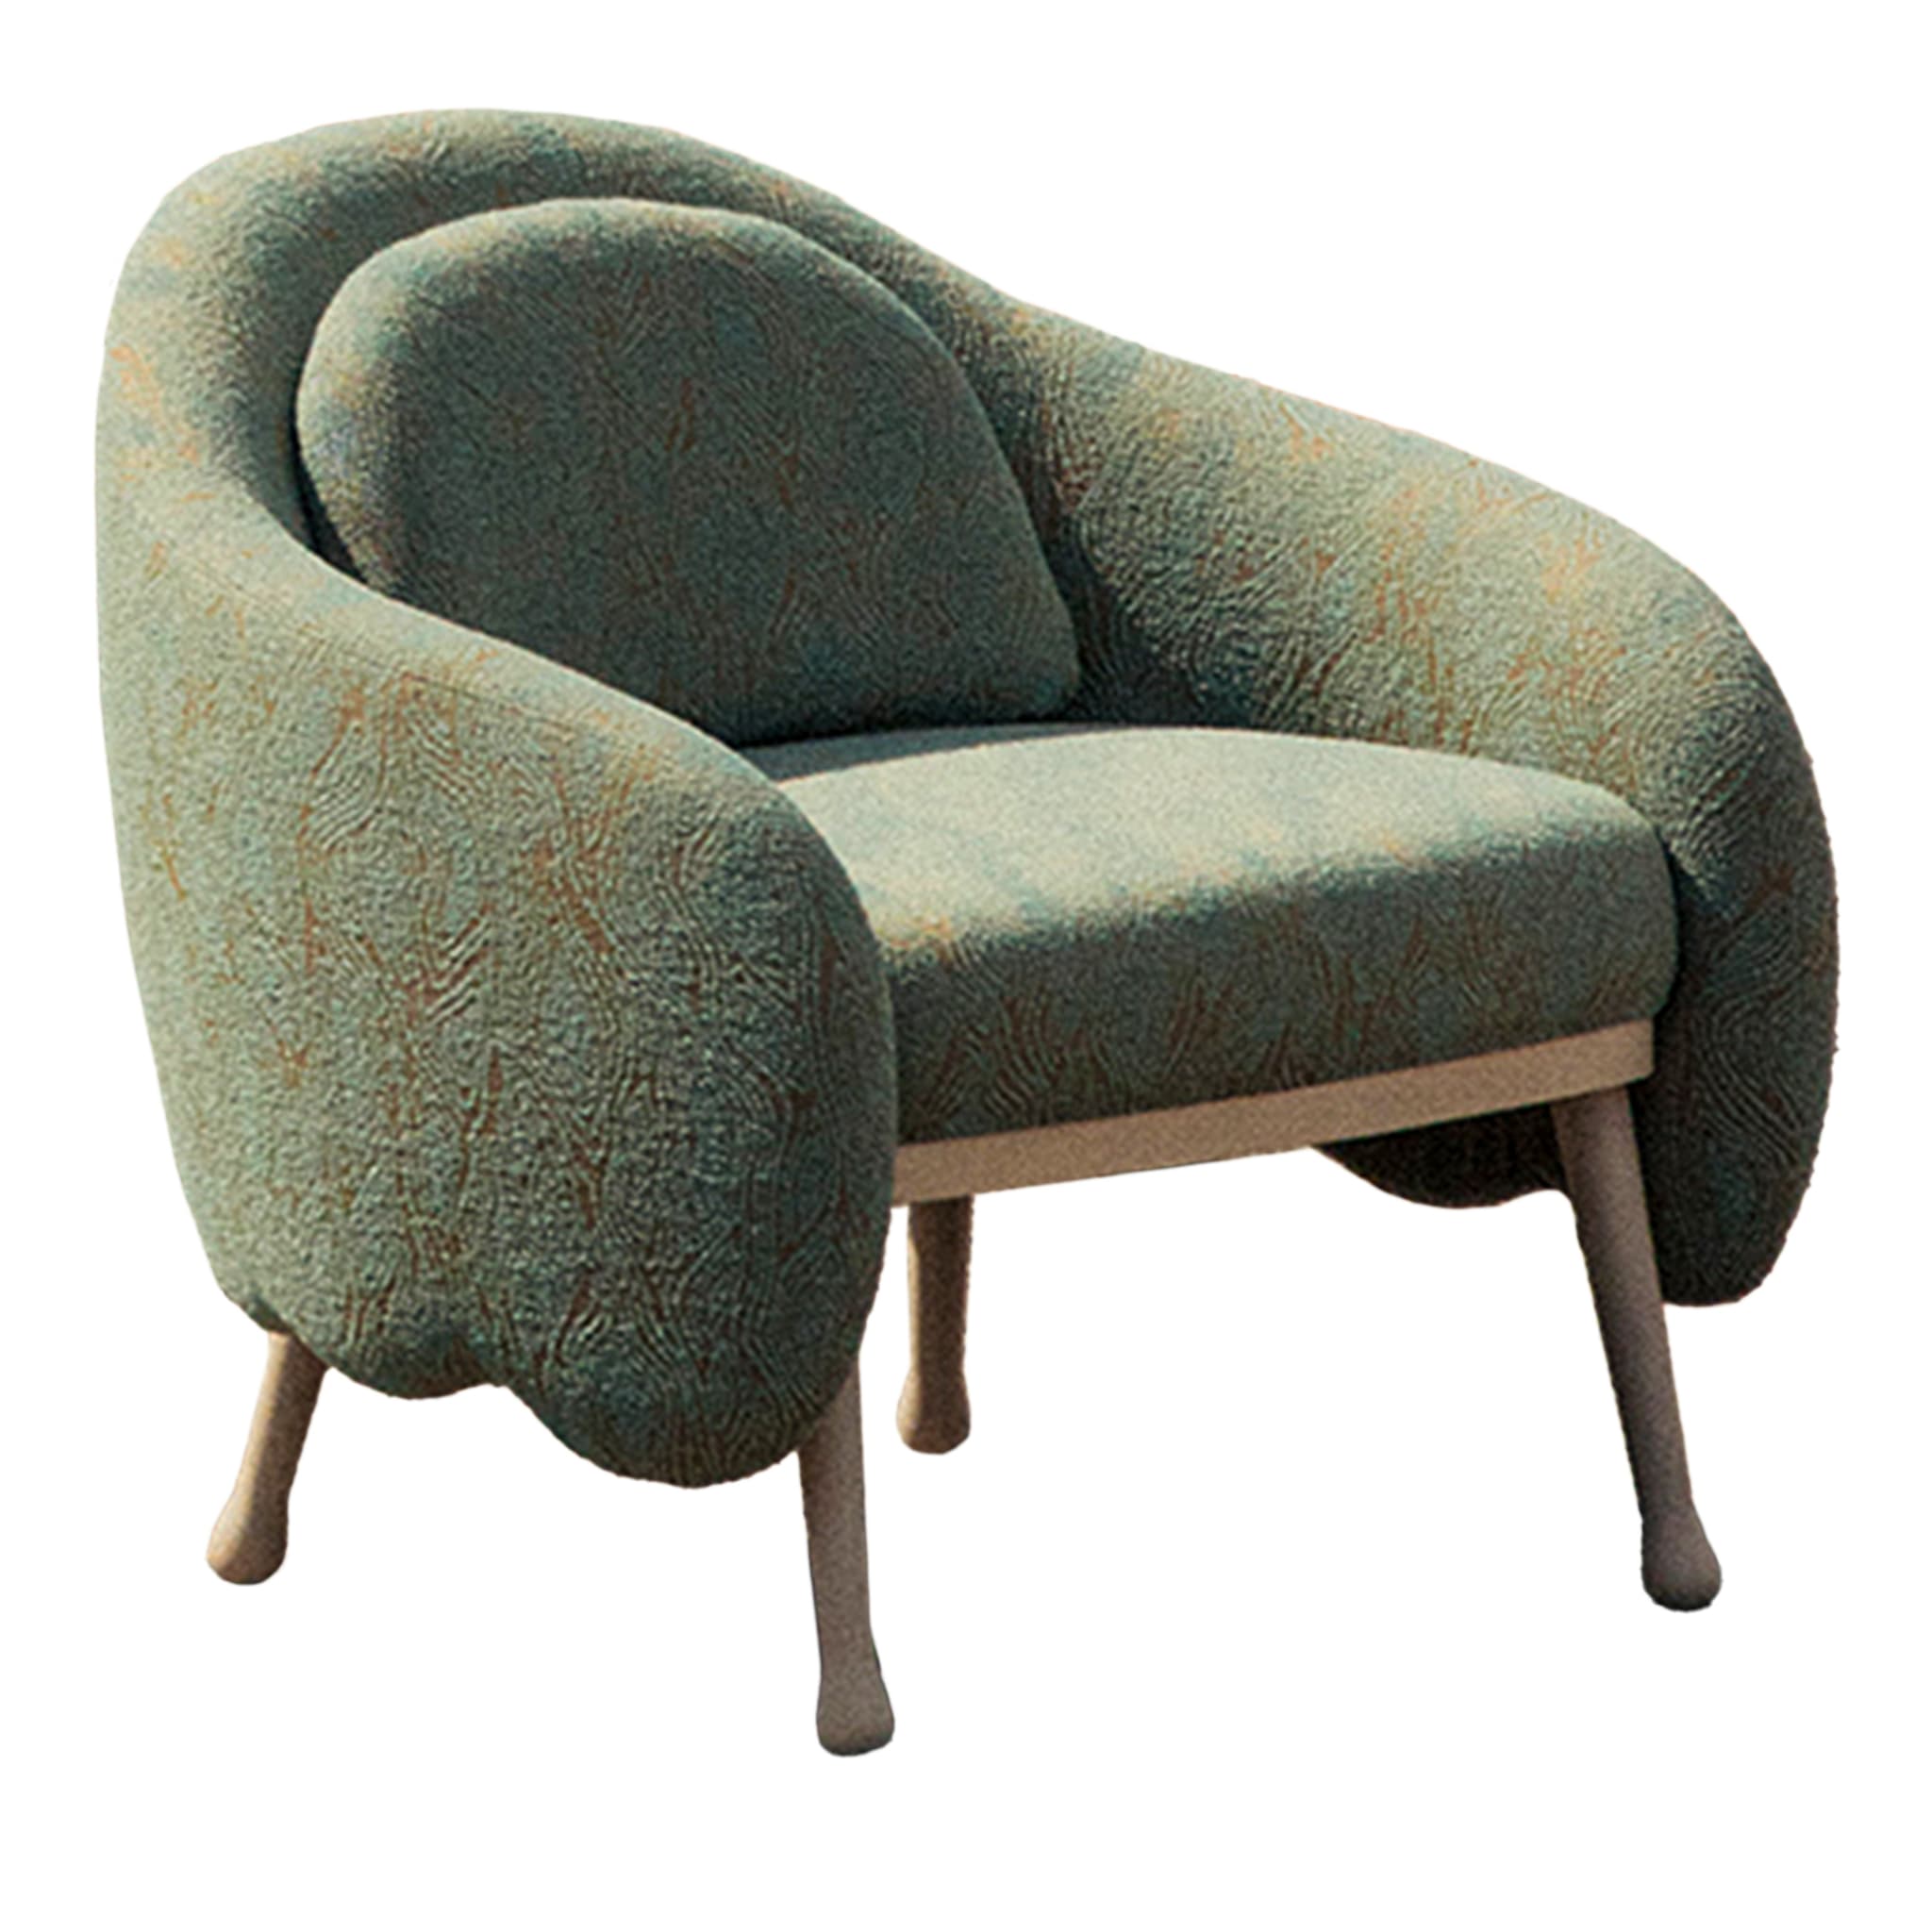 Corolla 271 Green Patterned Armchair  - Main view